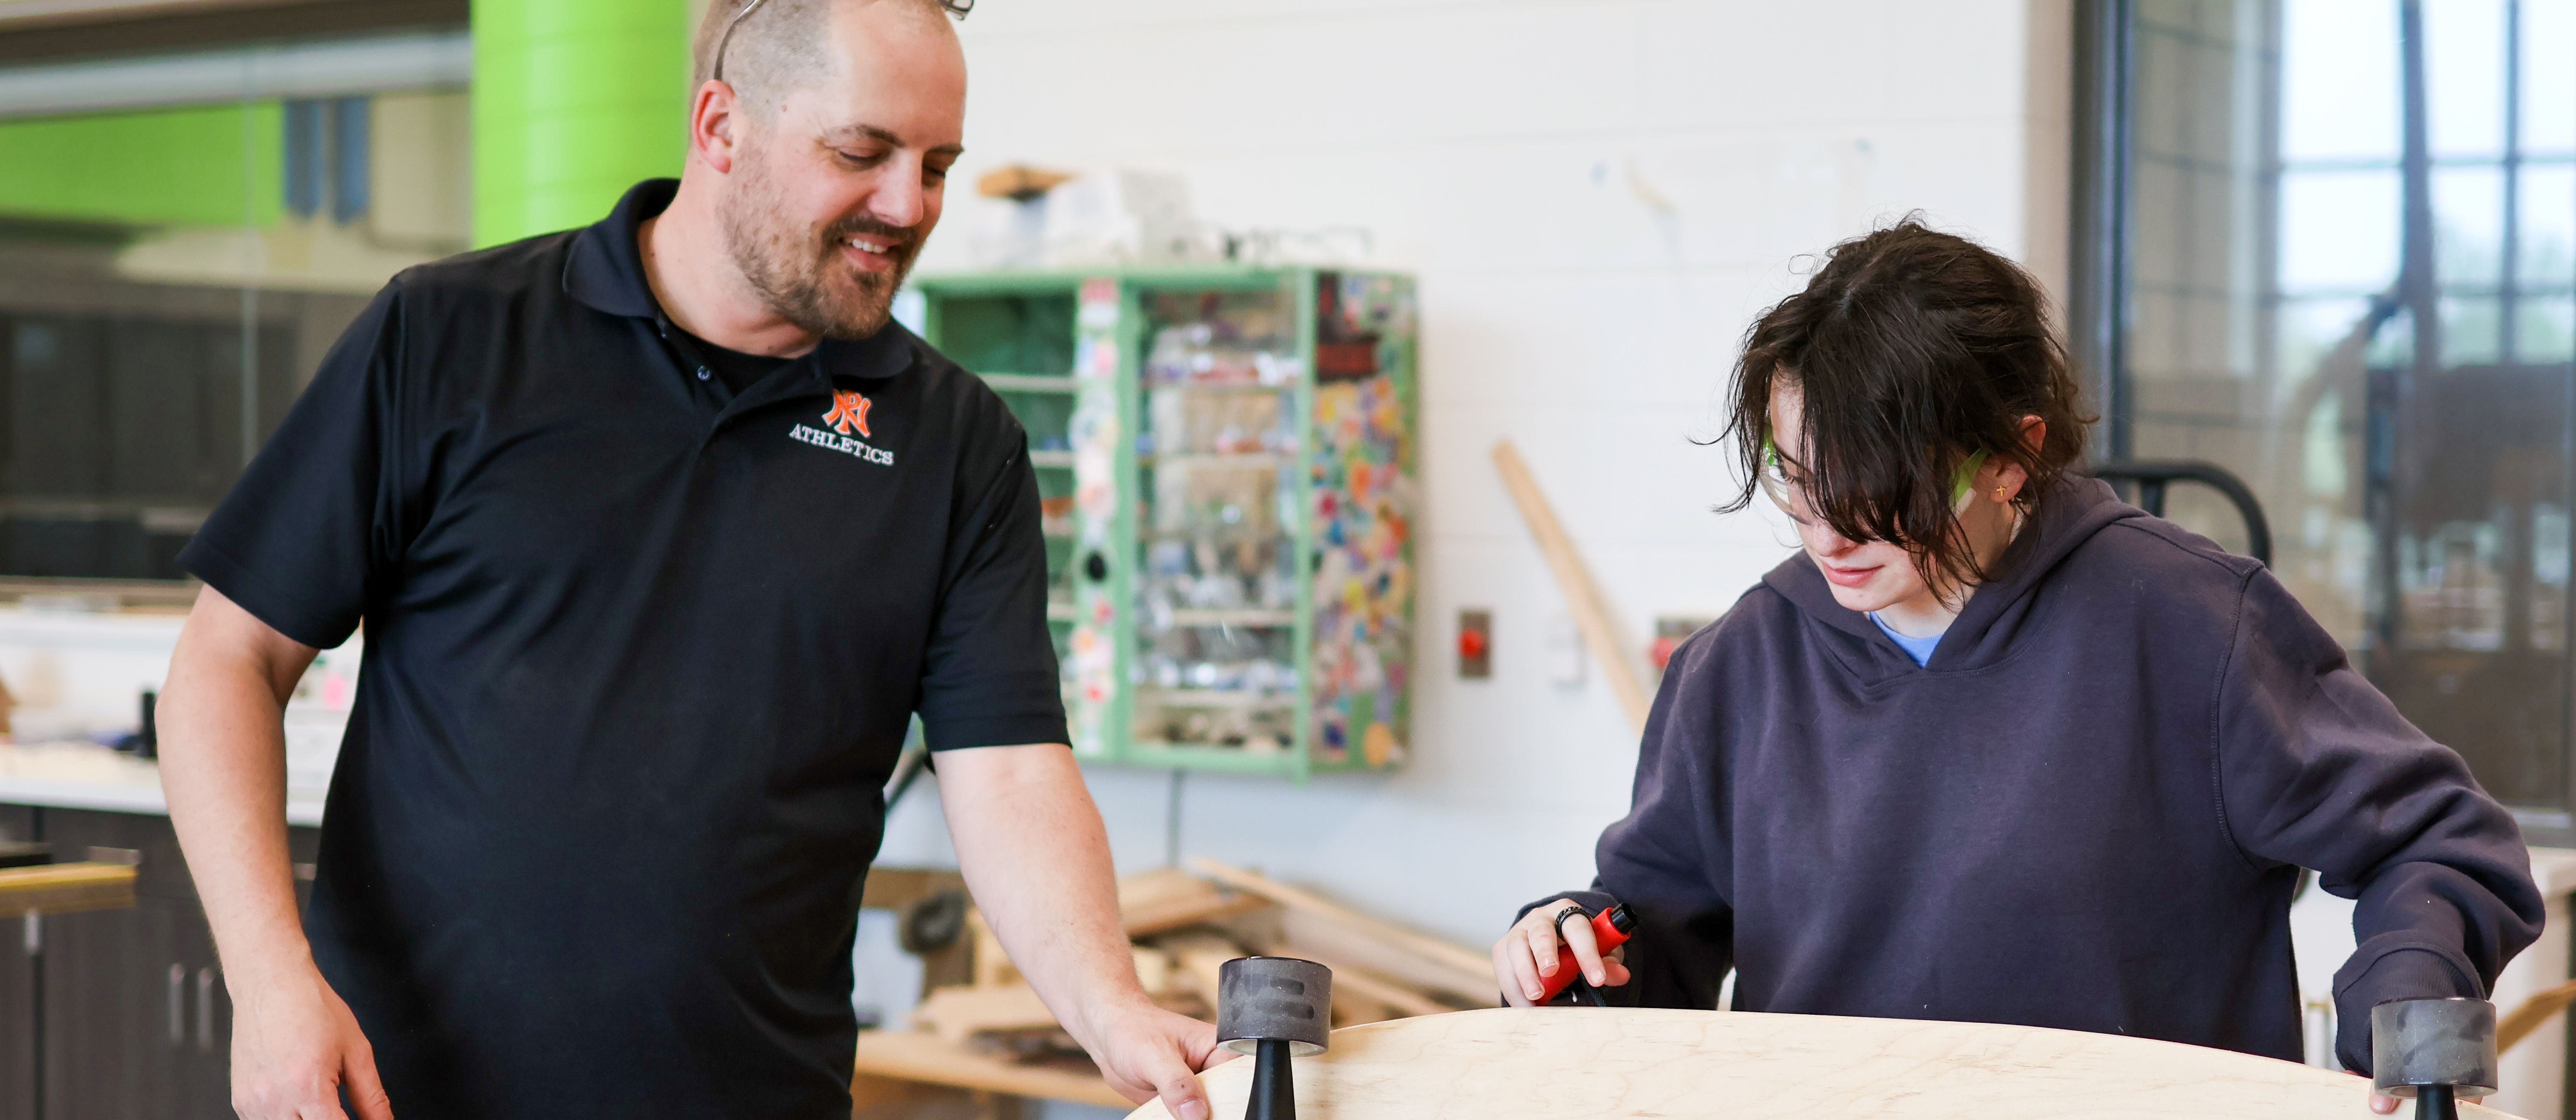 A teacher helps a student with her woodshop project